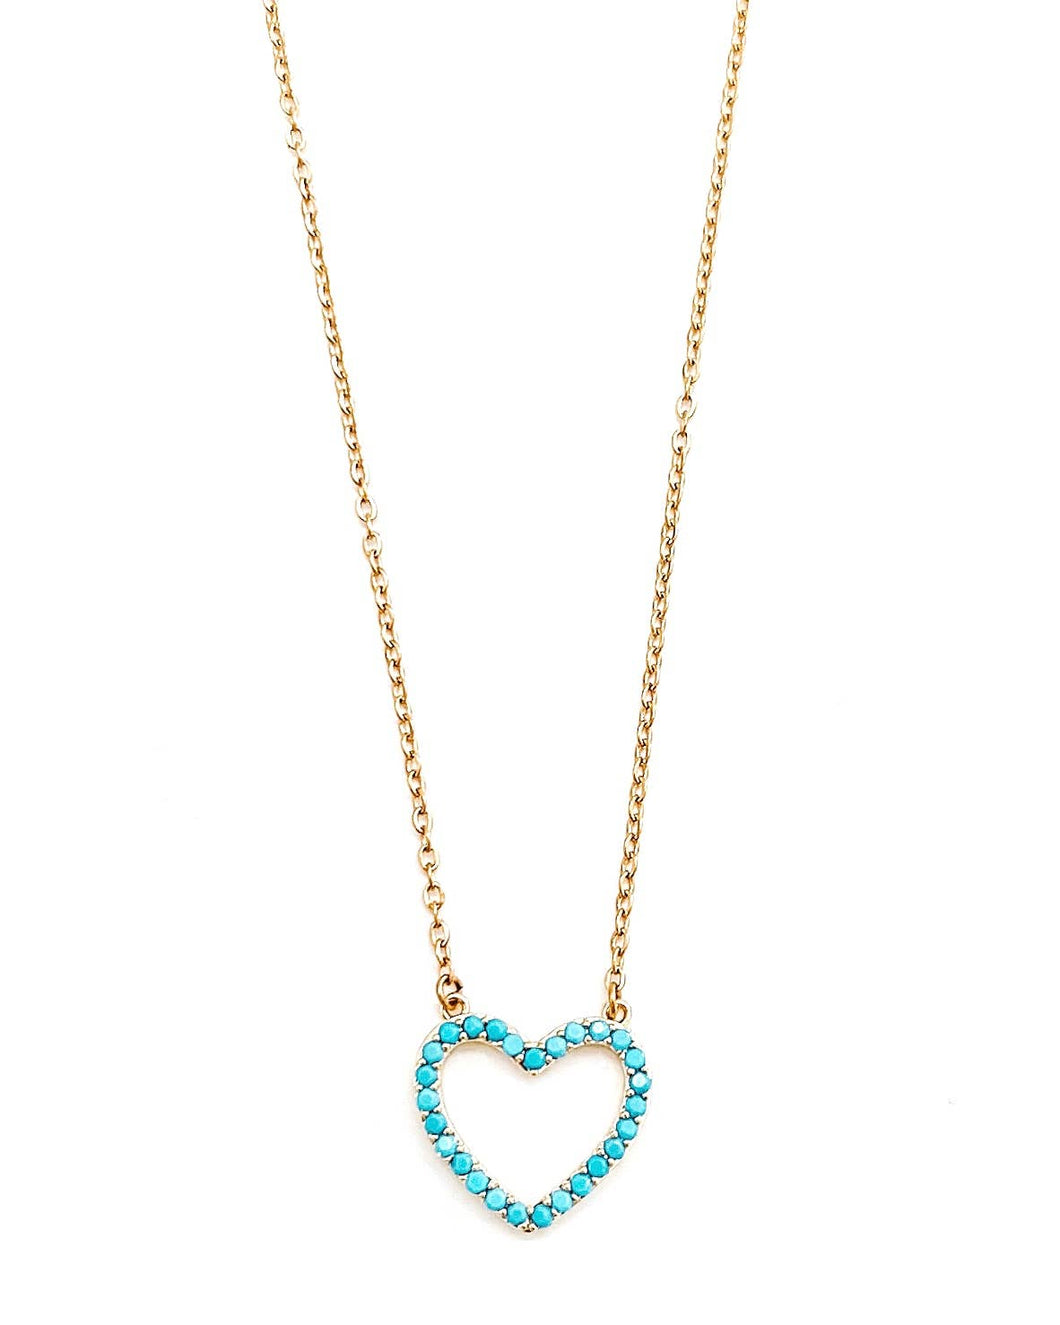 The Tennessee Turquoise Heart Necklace